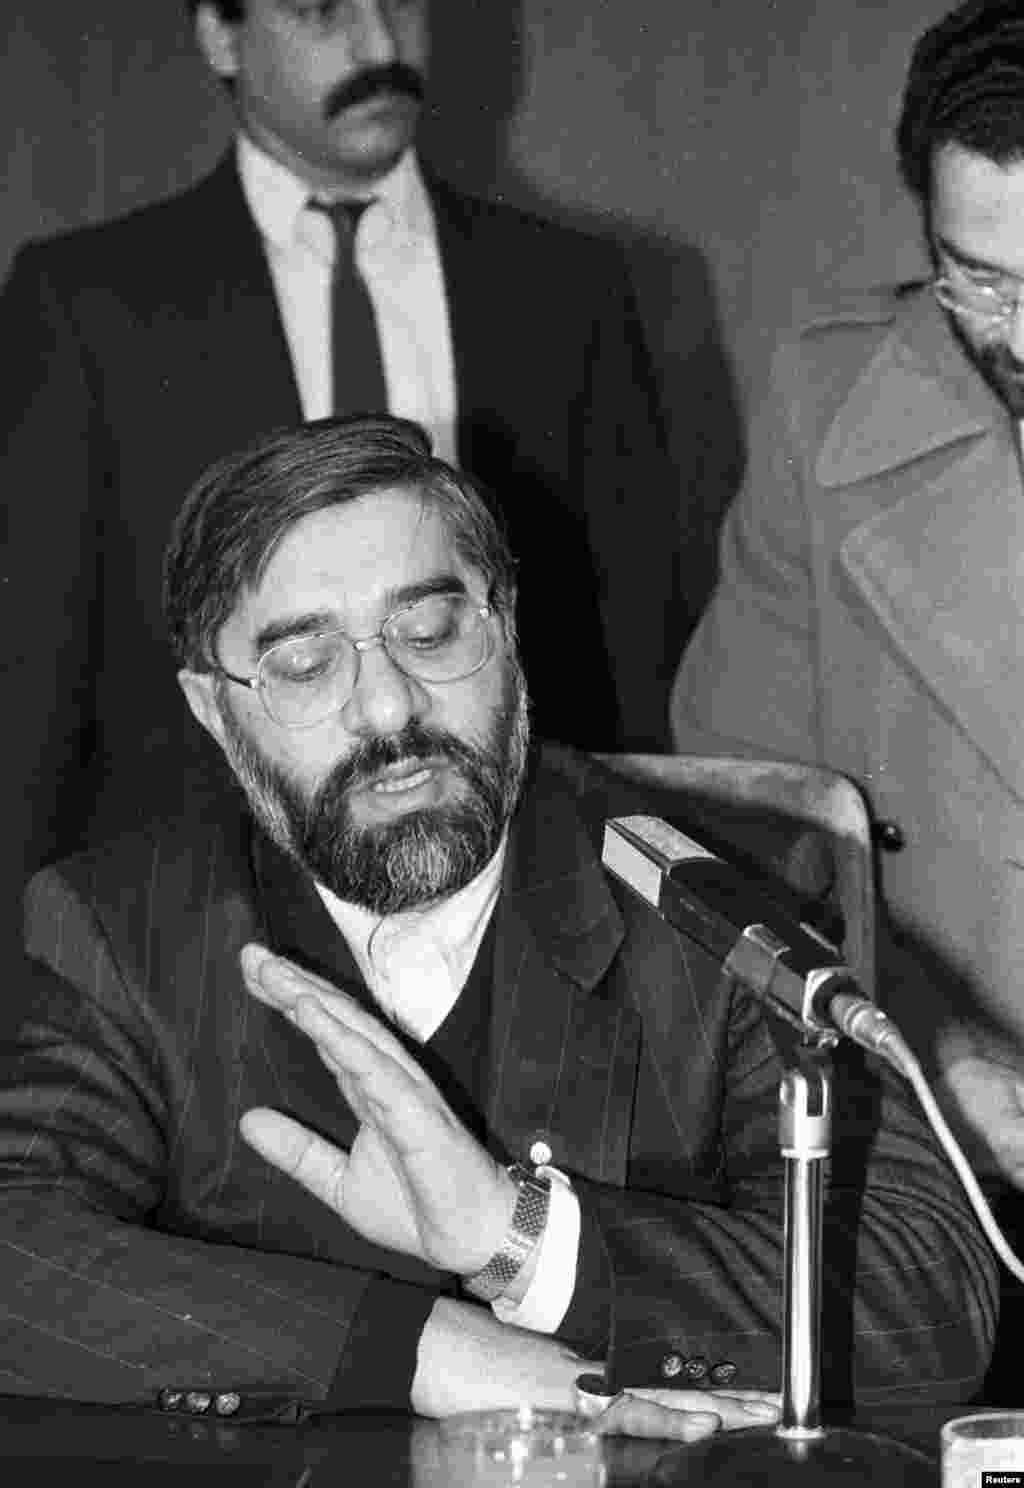 Iranian Prime Minister Mir Hossein Musavi answers questions during a press conference at Ankara airport, on February 17, 1989. He said that Iran saw Rushdie&#39;s &quot;The Satanic Verses&quot; as a kind of conspiracy against Islamic principles.